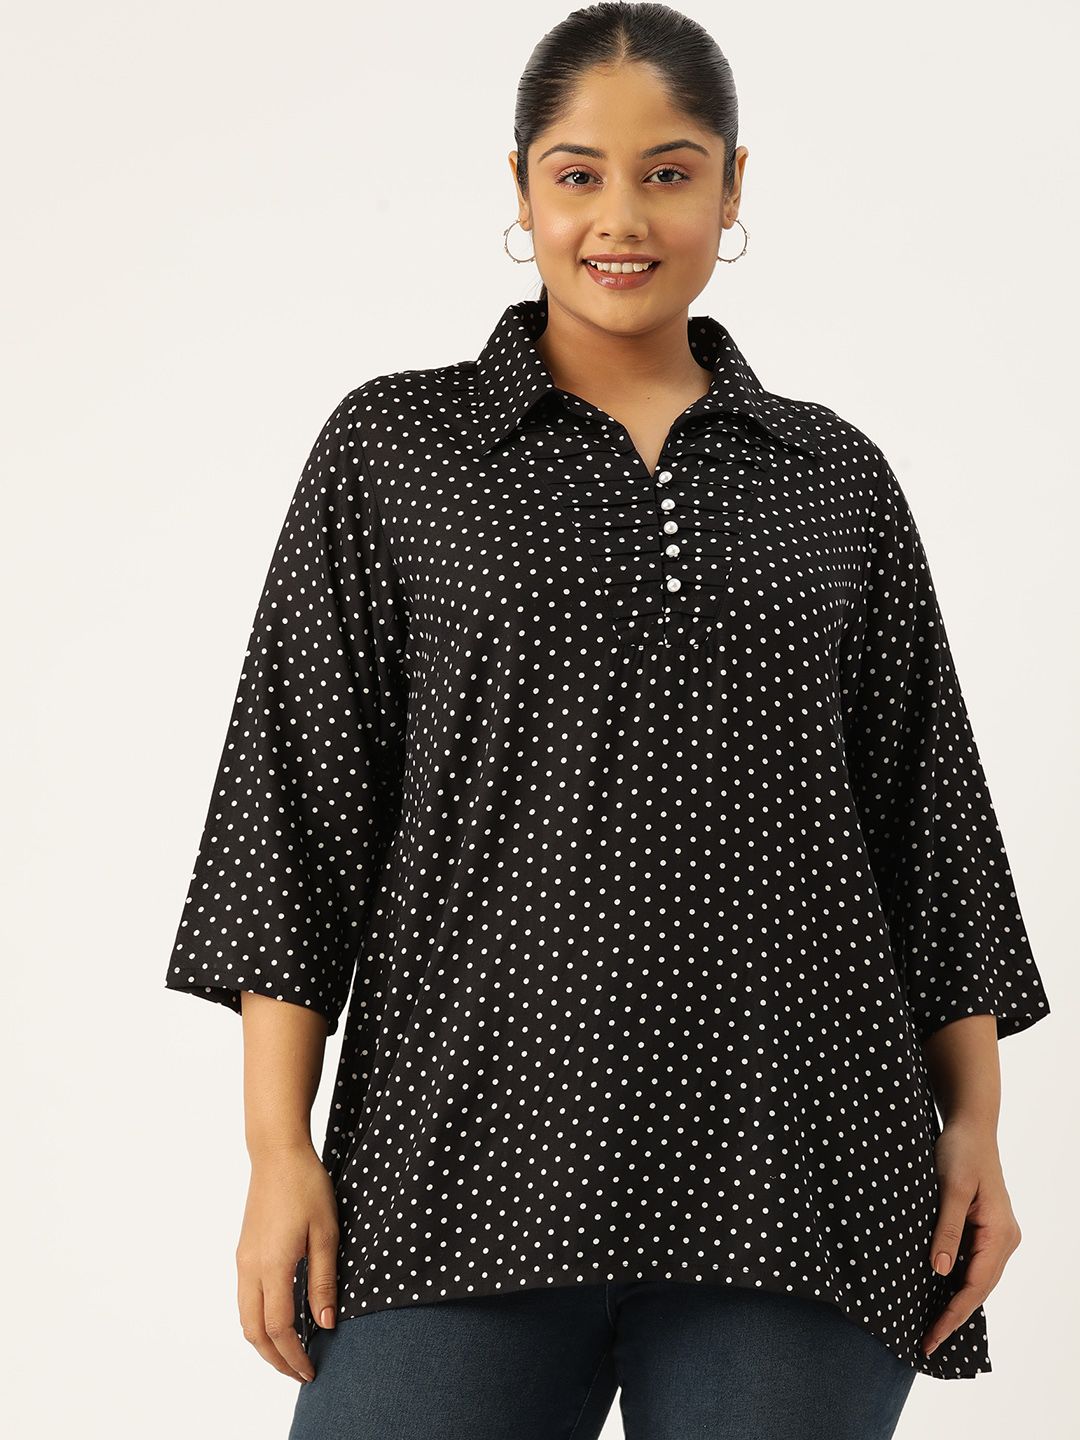 theRebelinme Plus Size Polka Dot Printed Shirt Style Longline Top Price in India